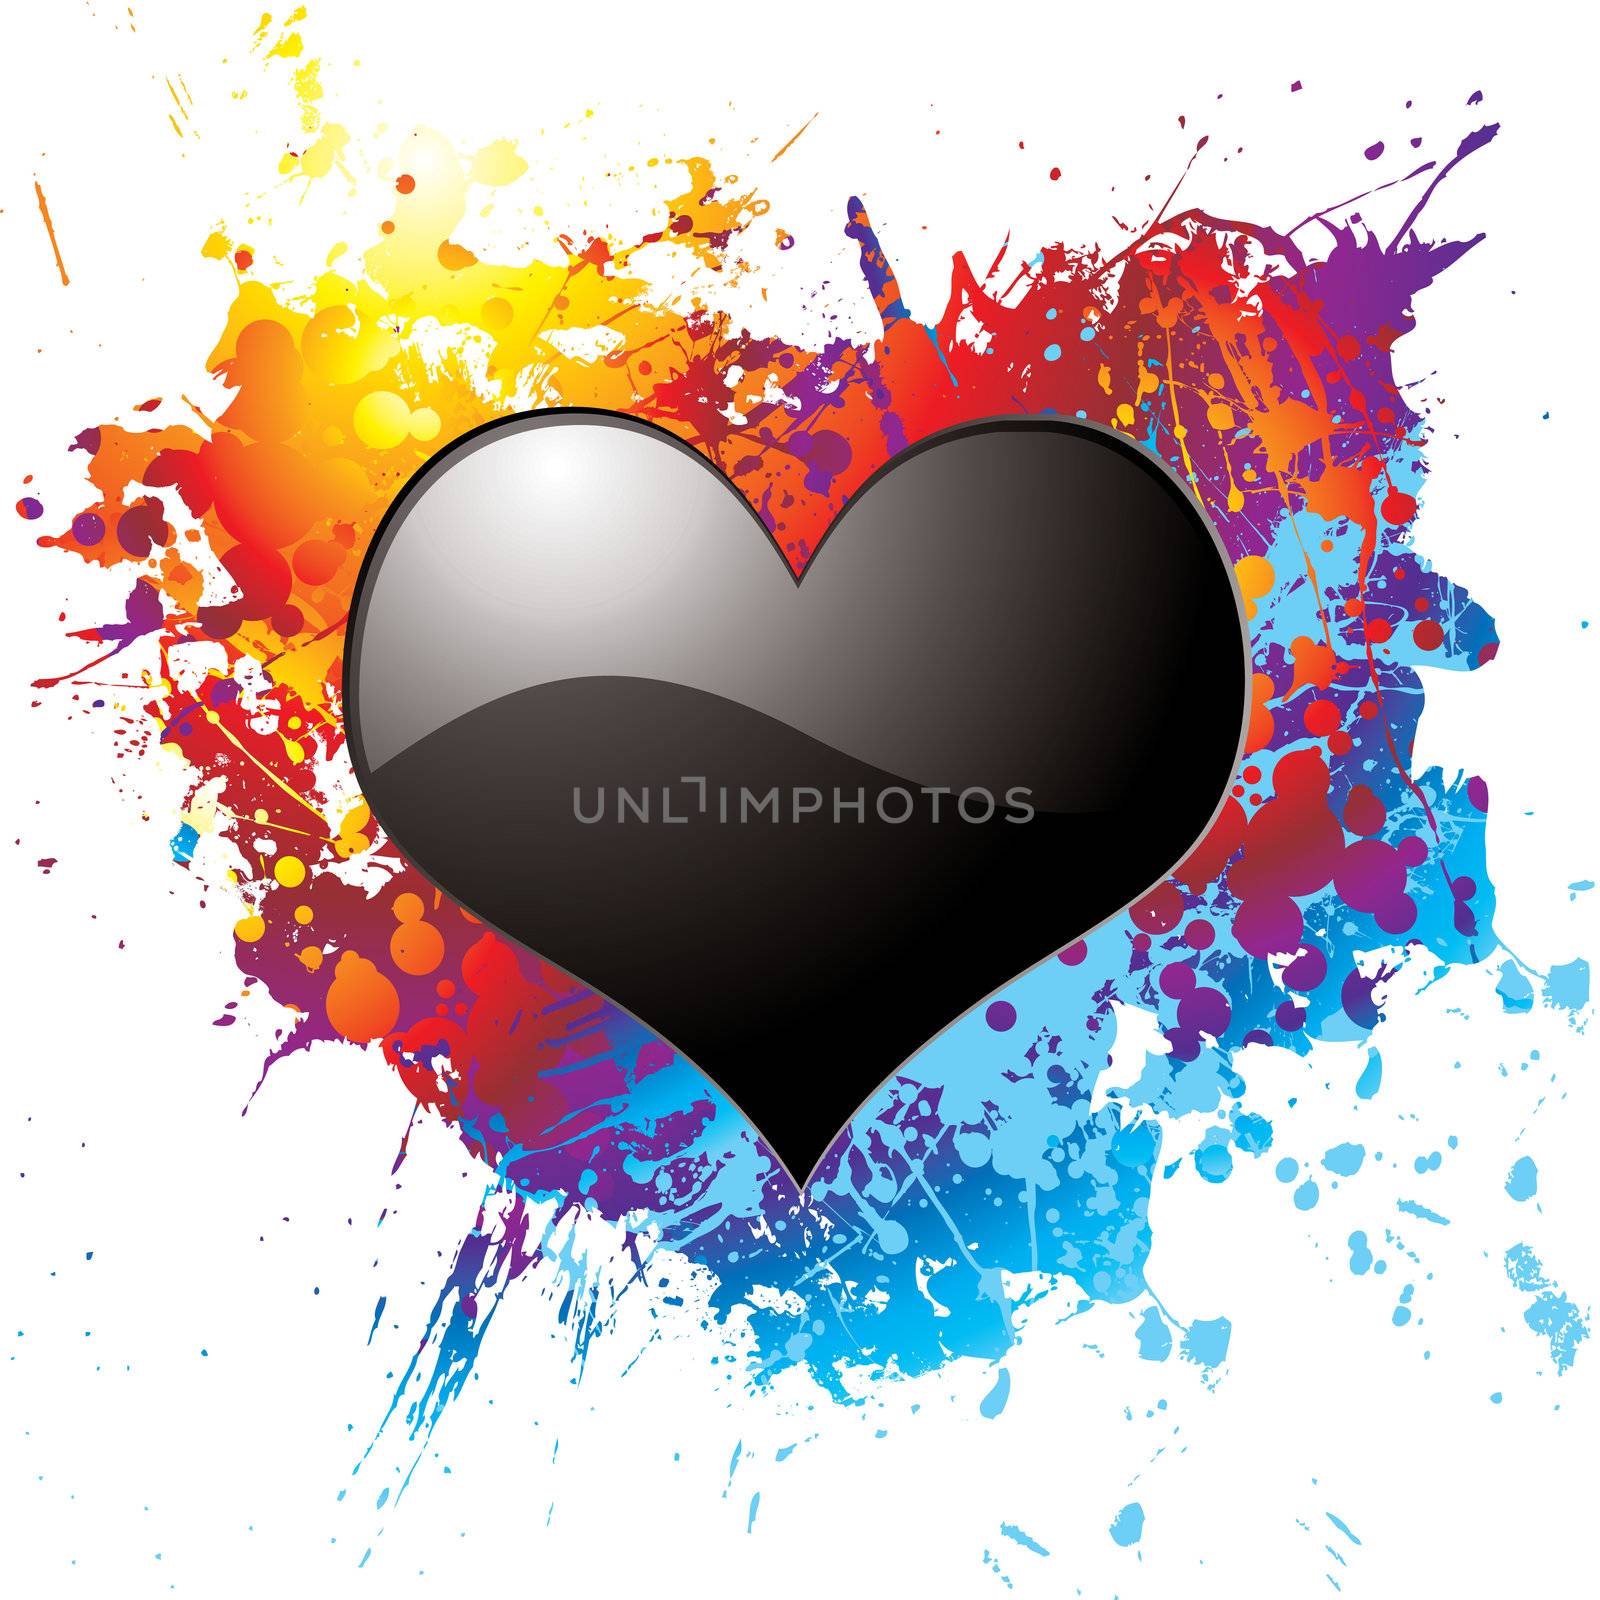 Black heart on a colorful ink splat illustrated background